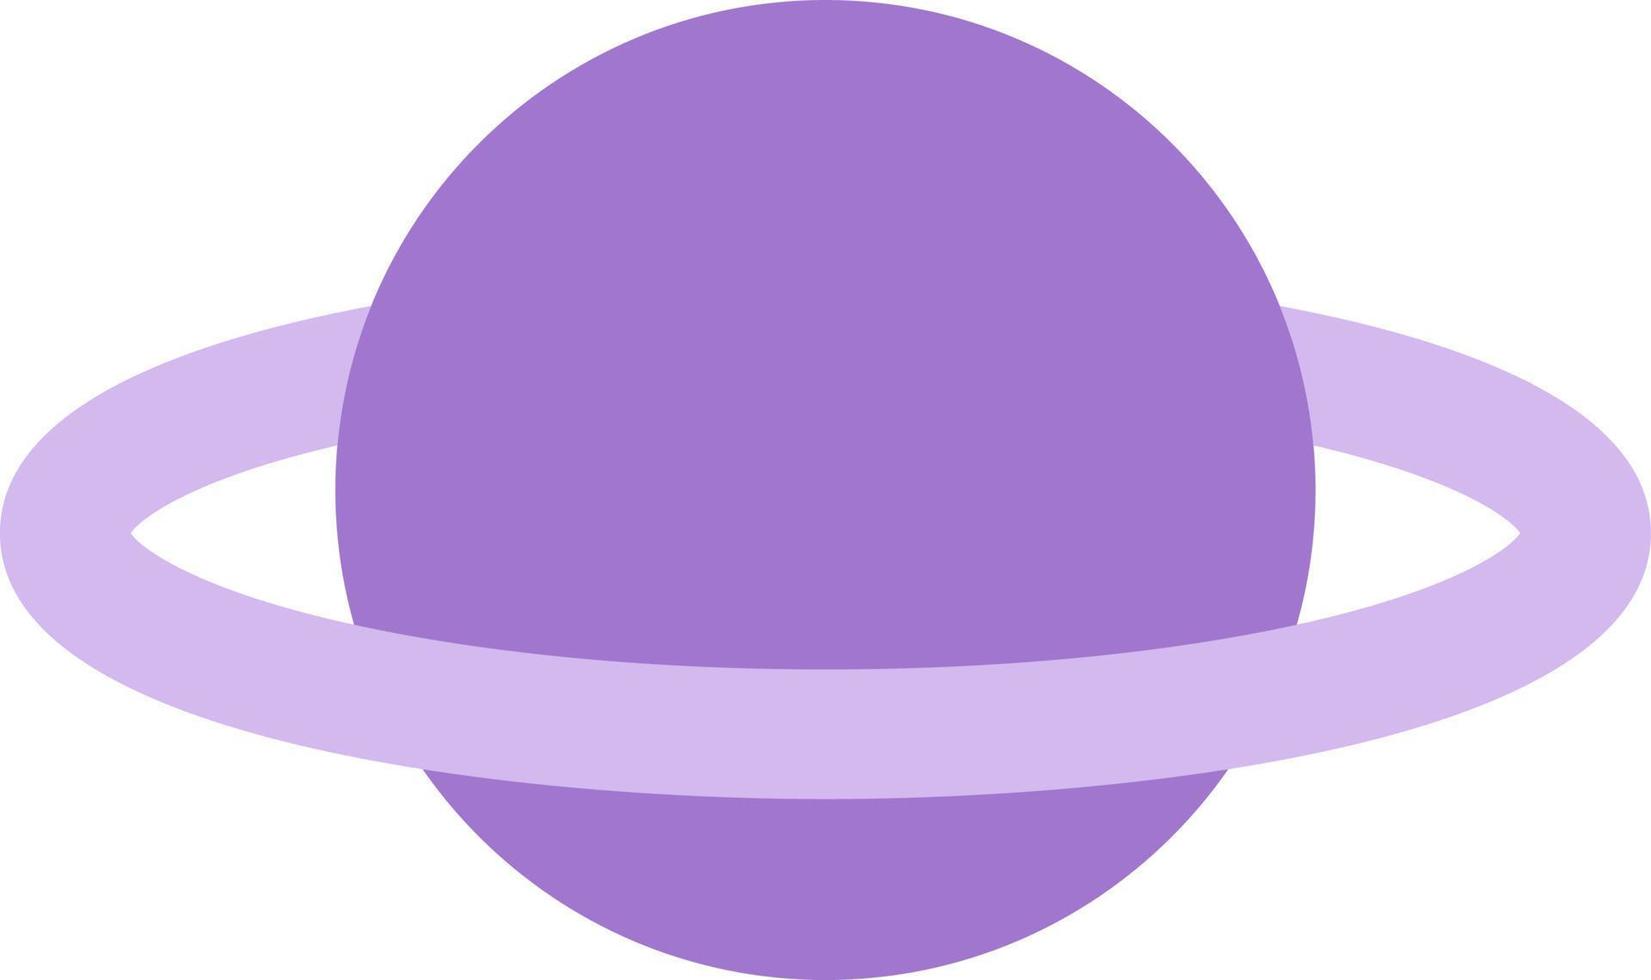 Purple planet, illustration, vector on a white background.